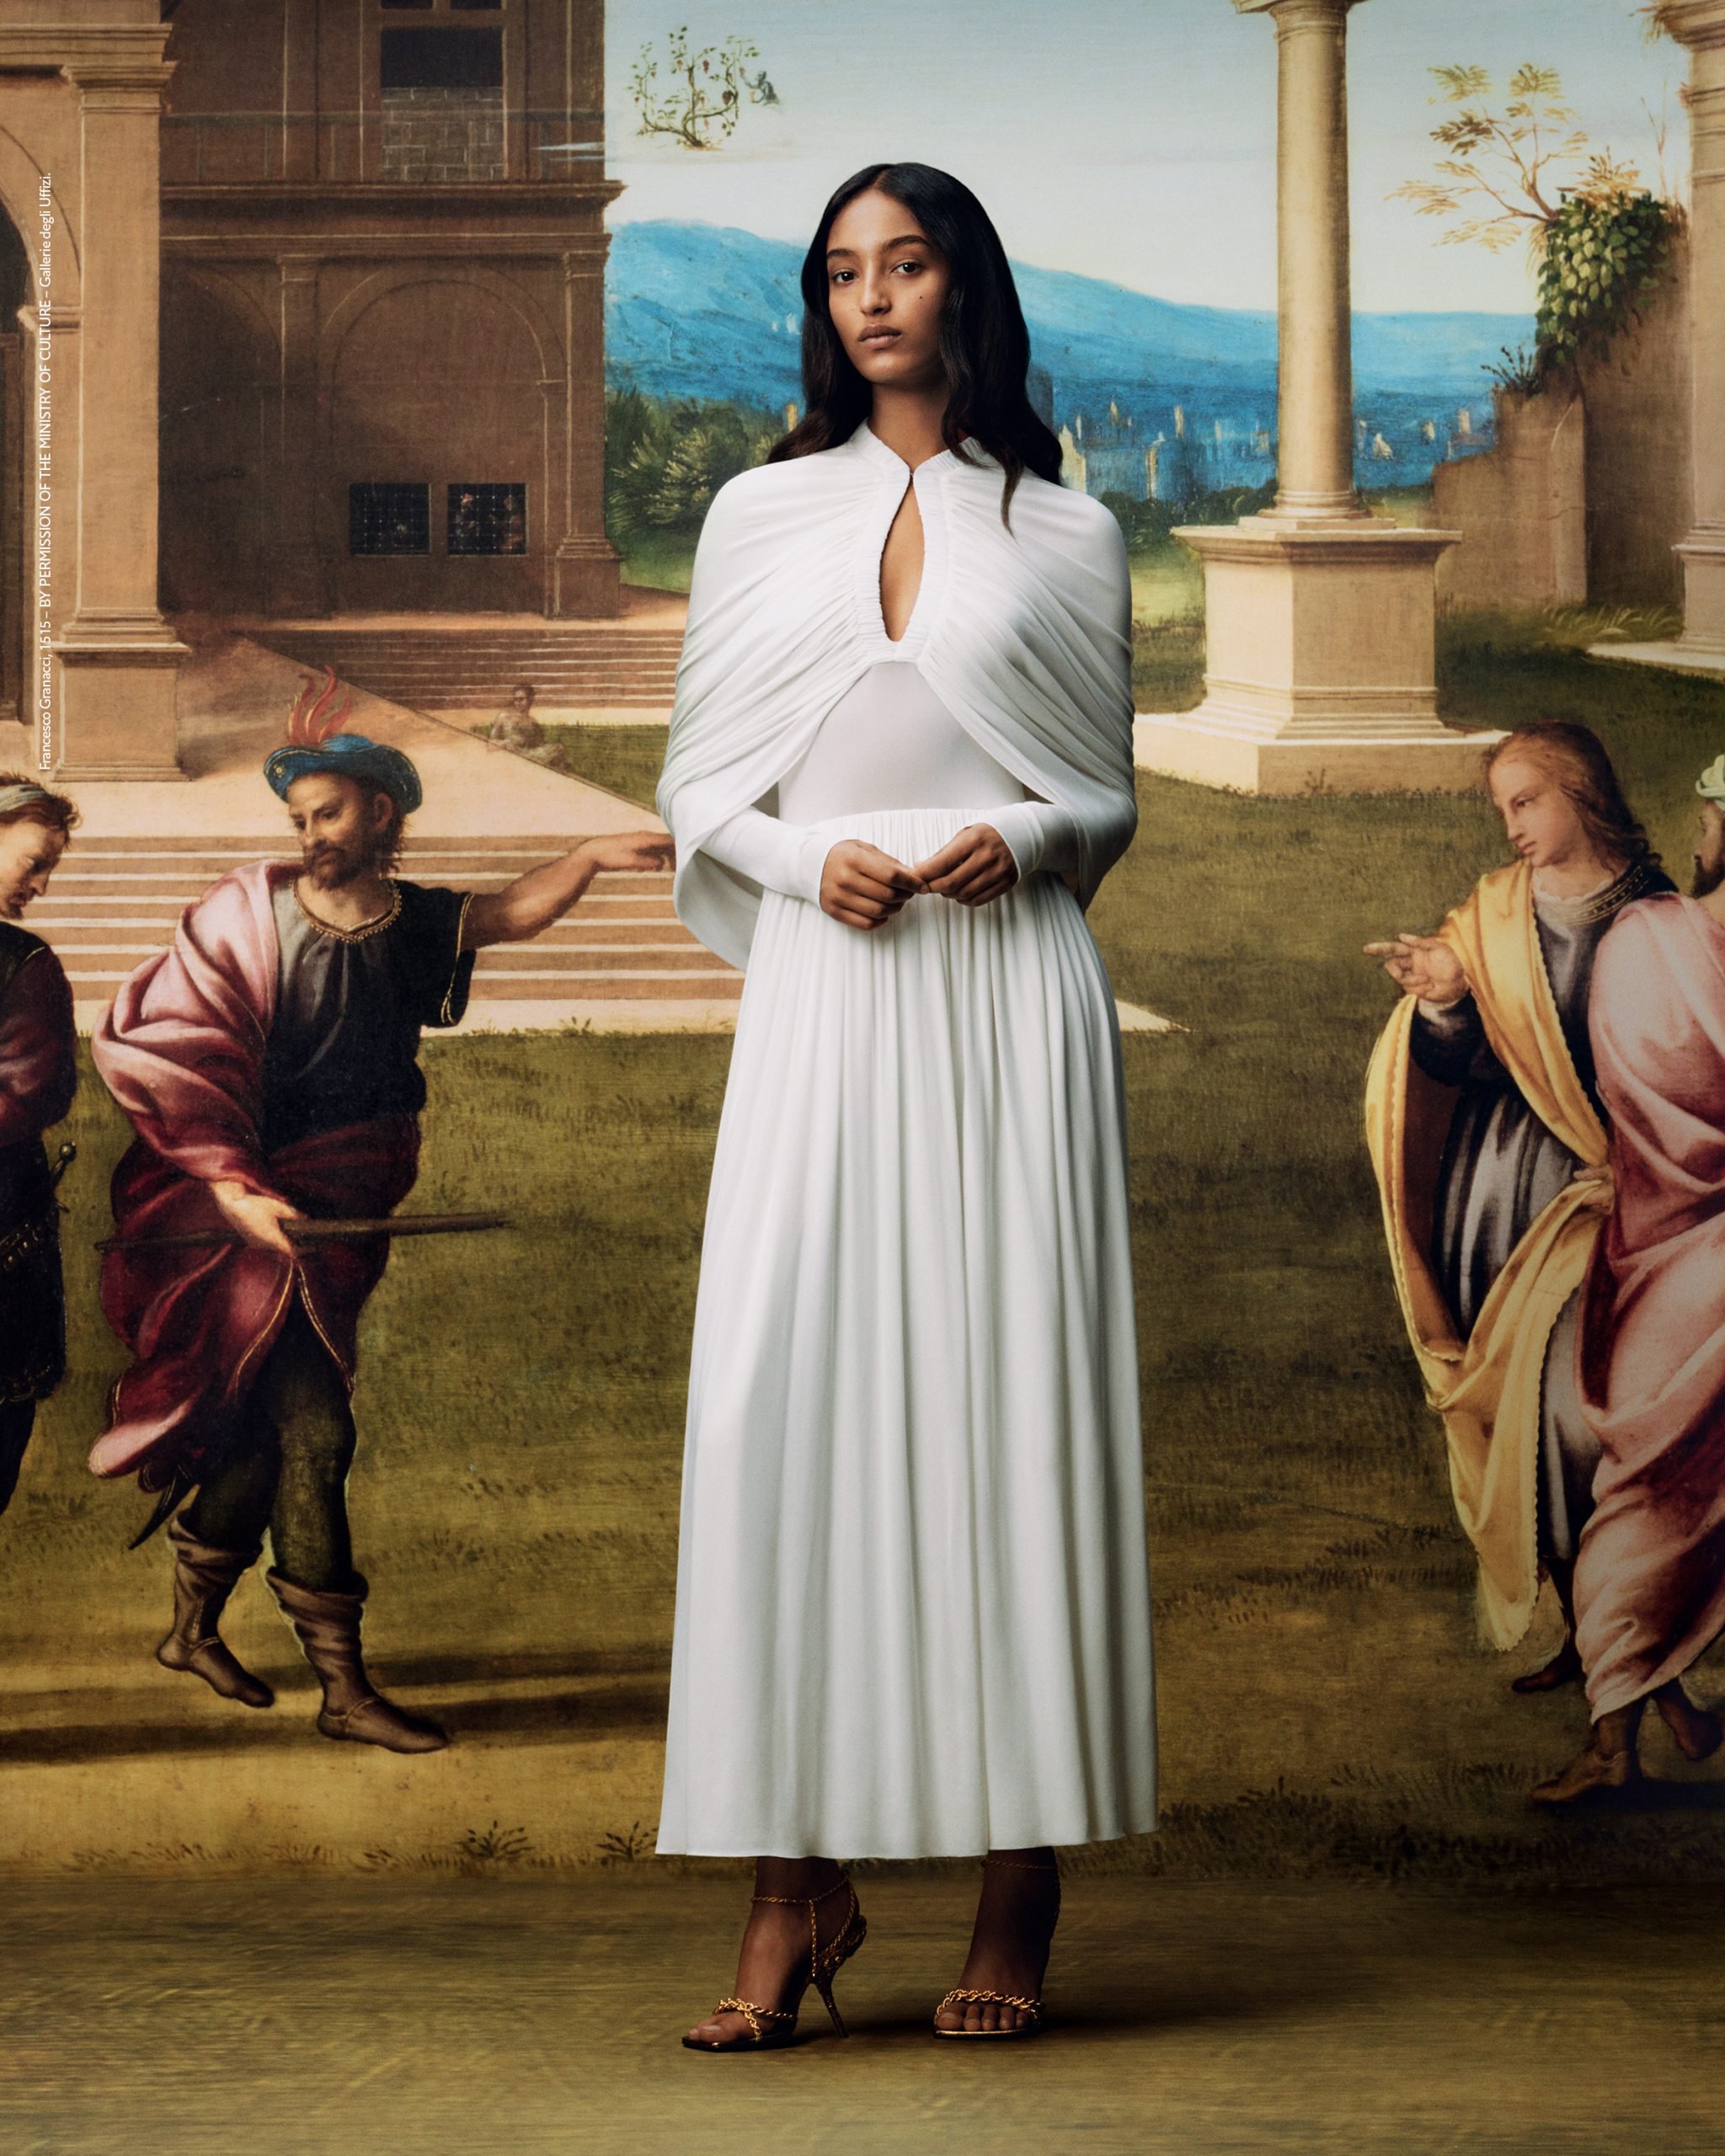 Uffizi Is Suing Fashion Label Jean Paul Gaultier for Using